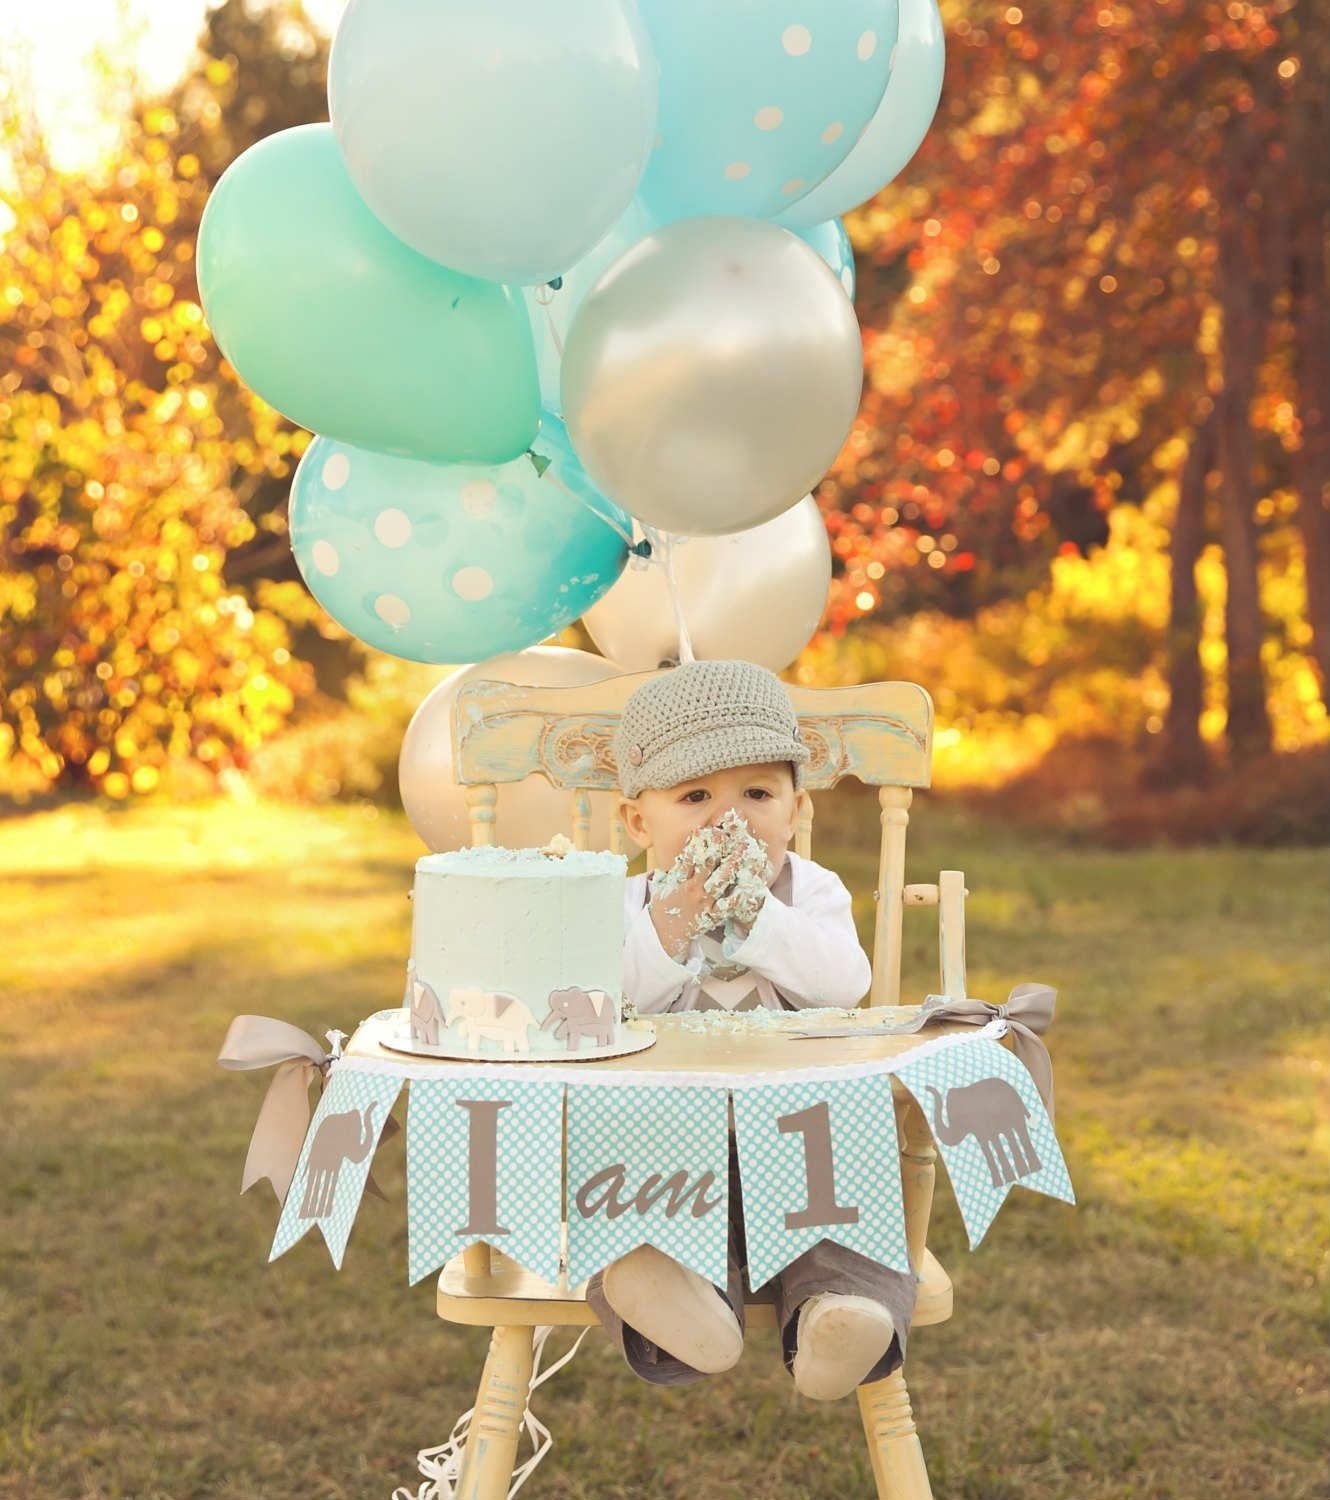 10 Trendy Ideas For A 1St Birthday Party 10 1st birthday party ideas for boys part 2 birthday decorations 2 2022